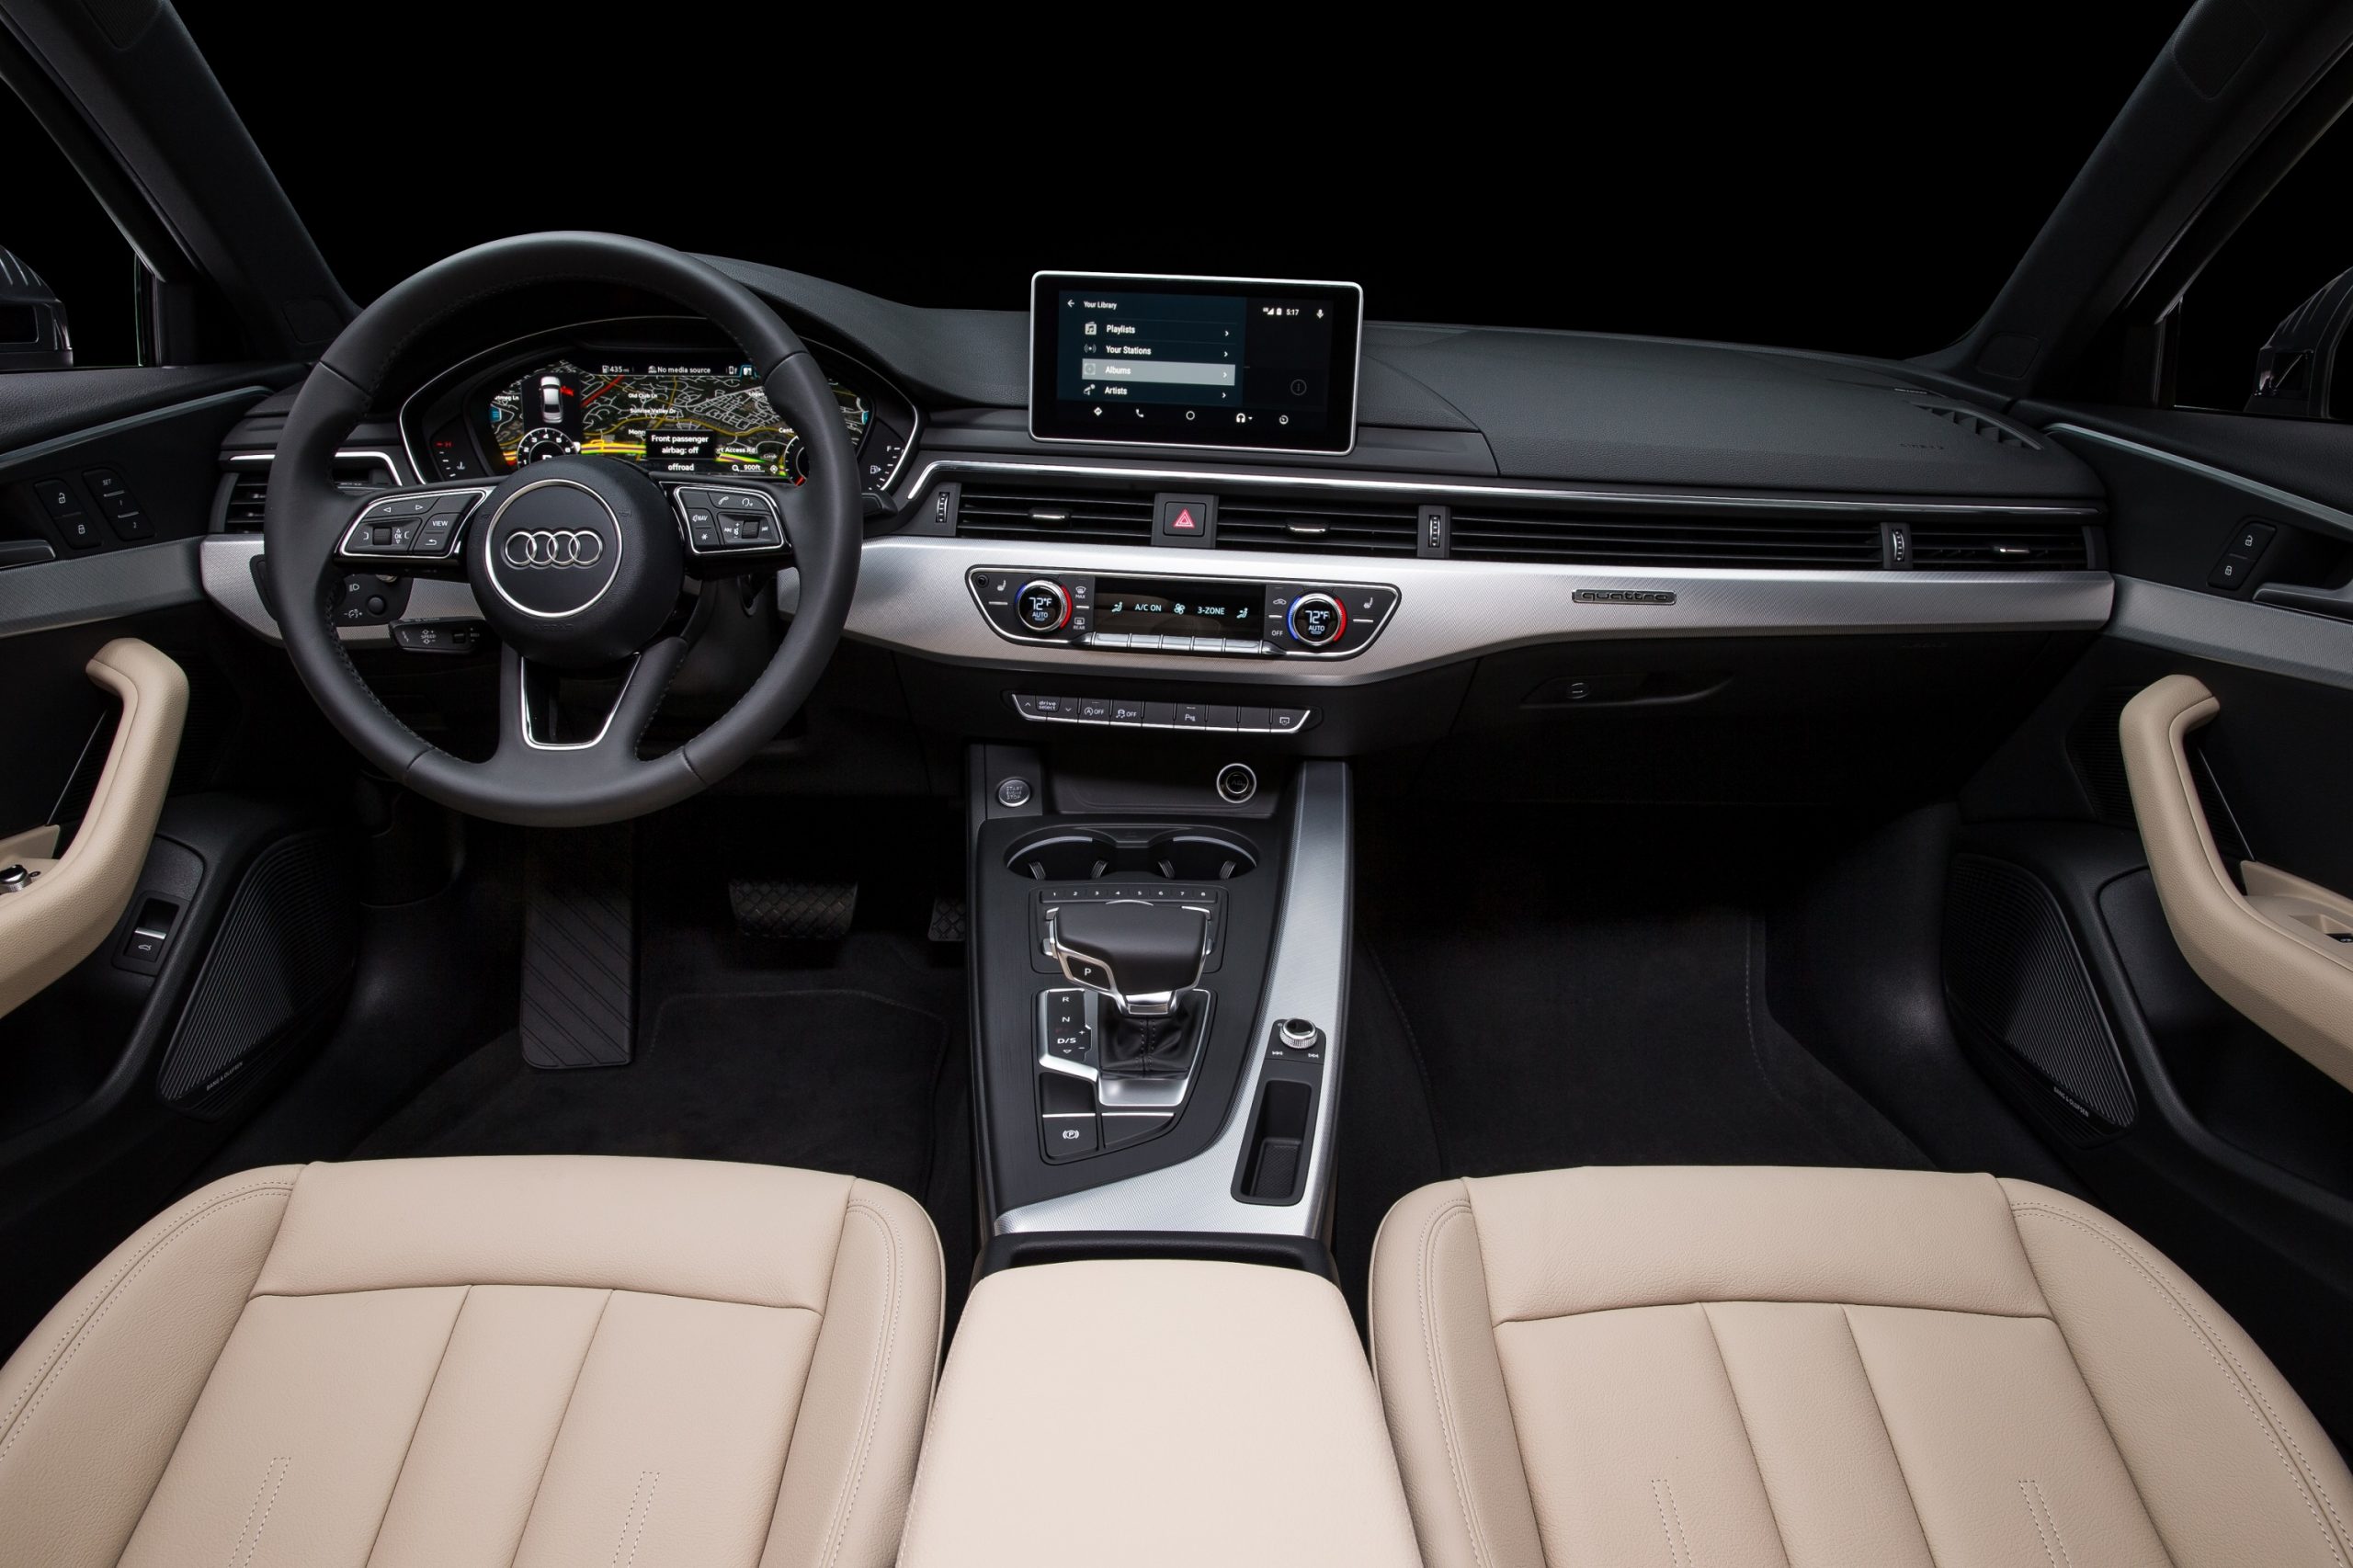 The black and beige interior of the new Audi A4